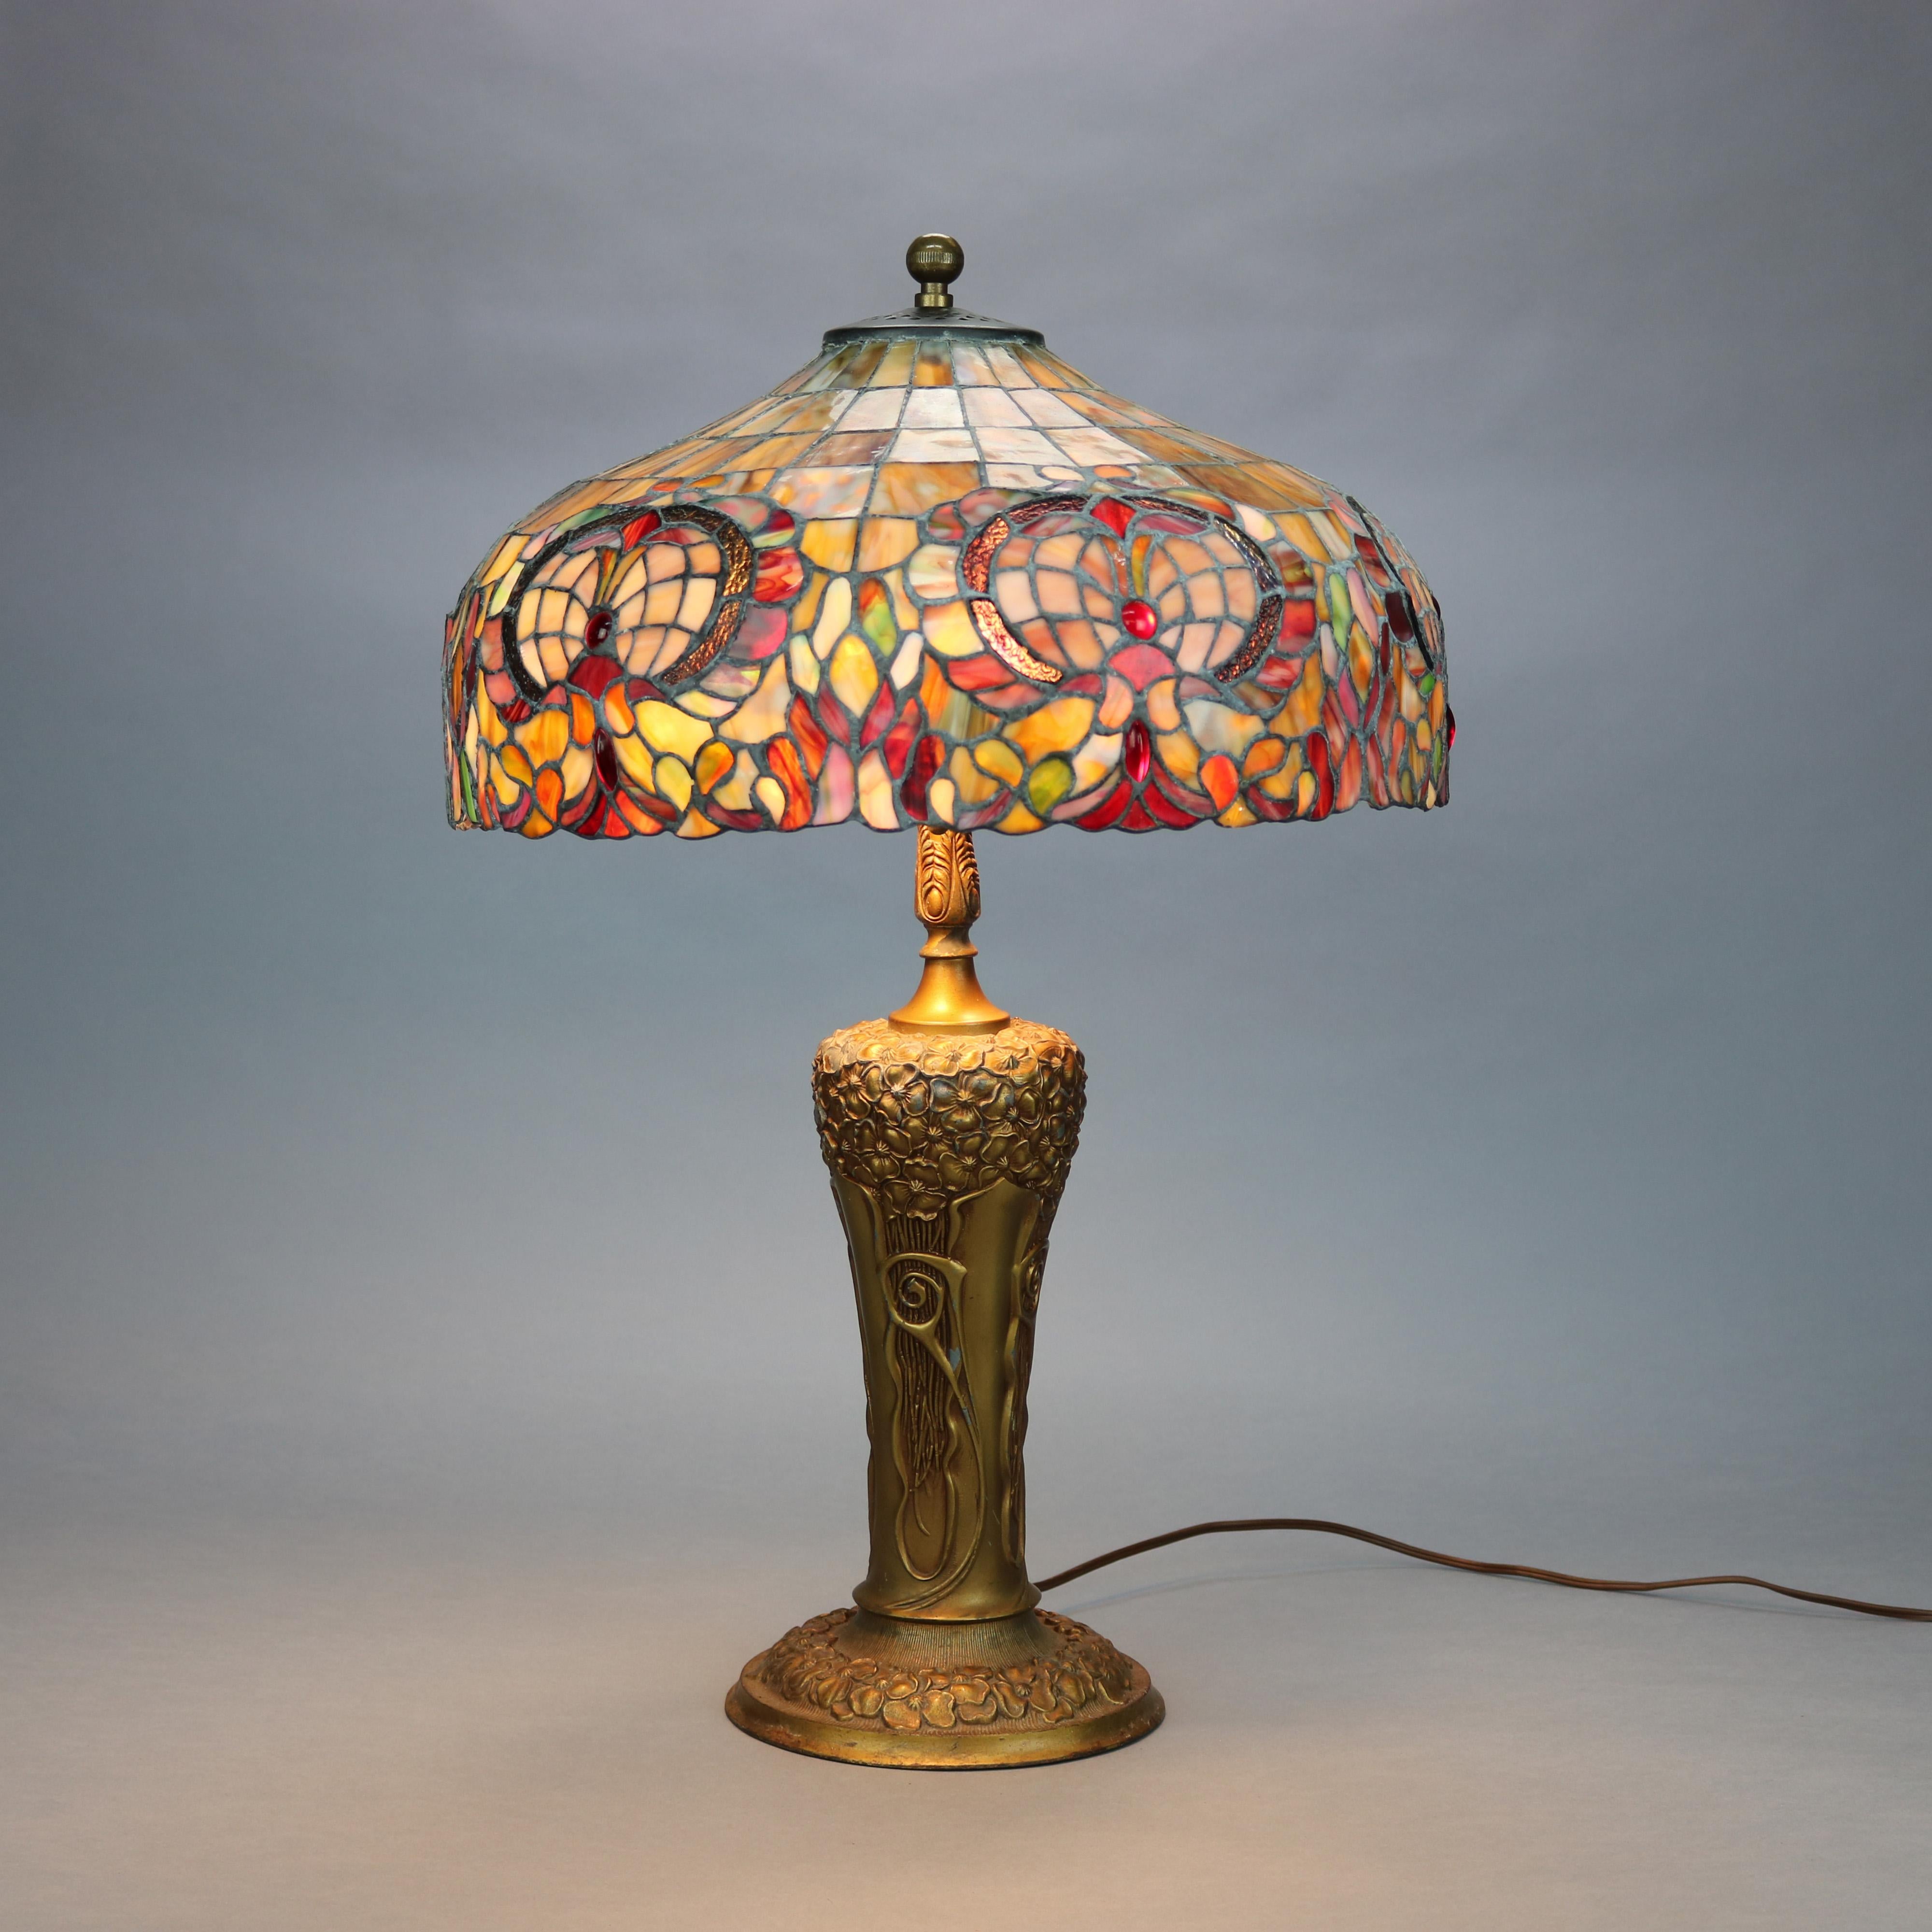 Metal Arts & Crafts Pittsburgh Lamp Base with Mosaic Leaded Glass Shade, c 1910